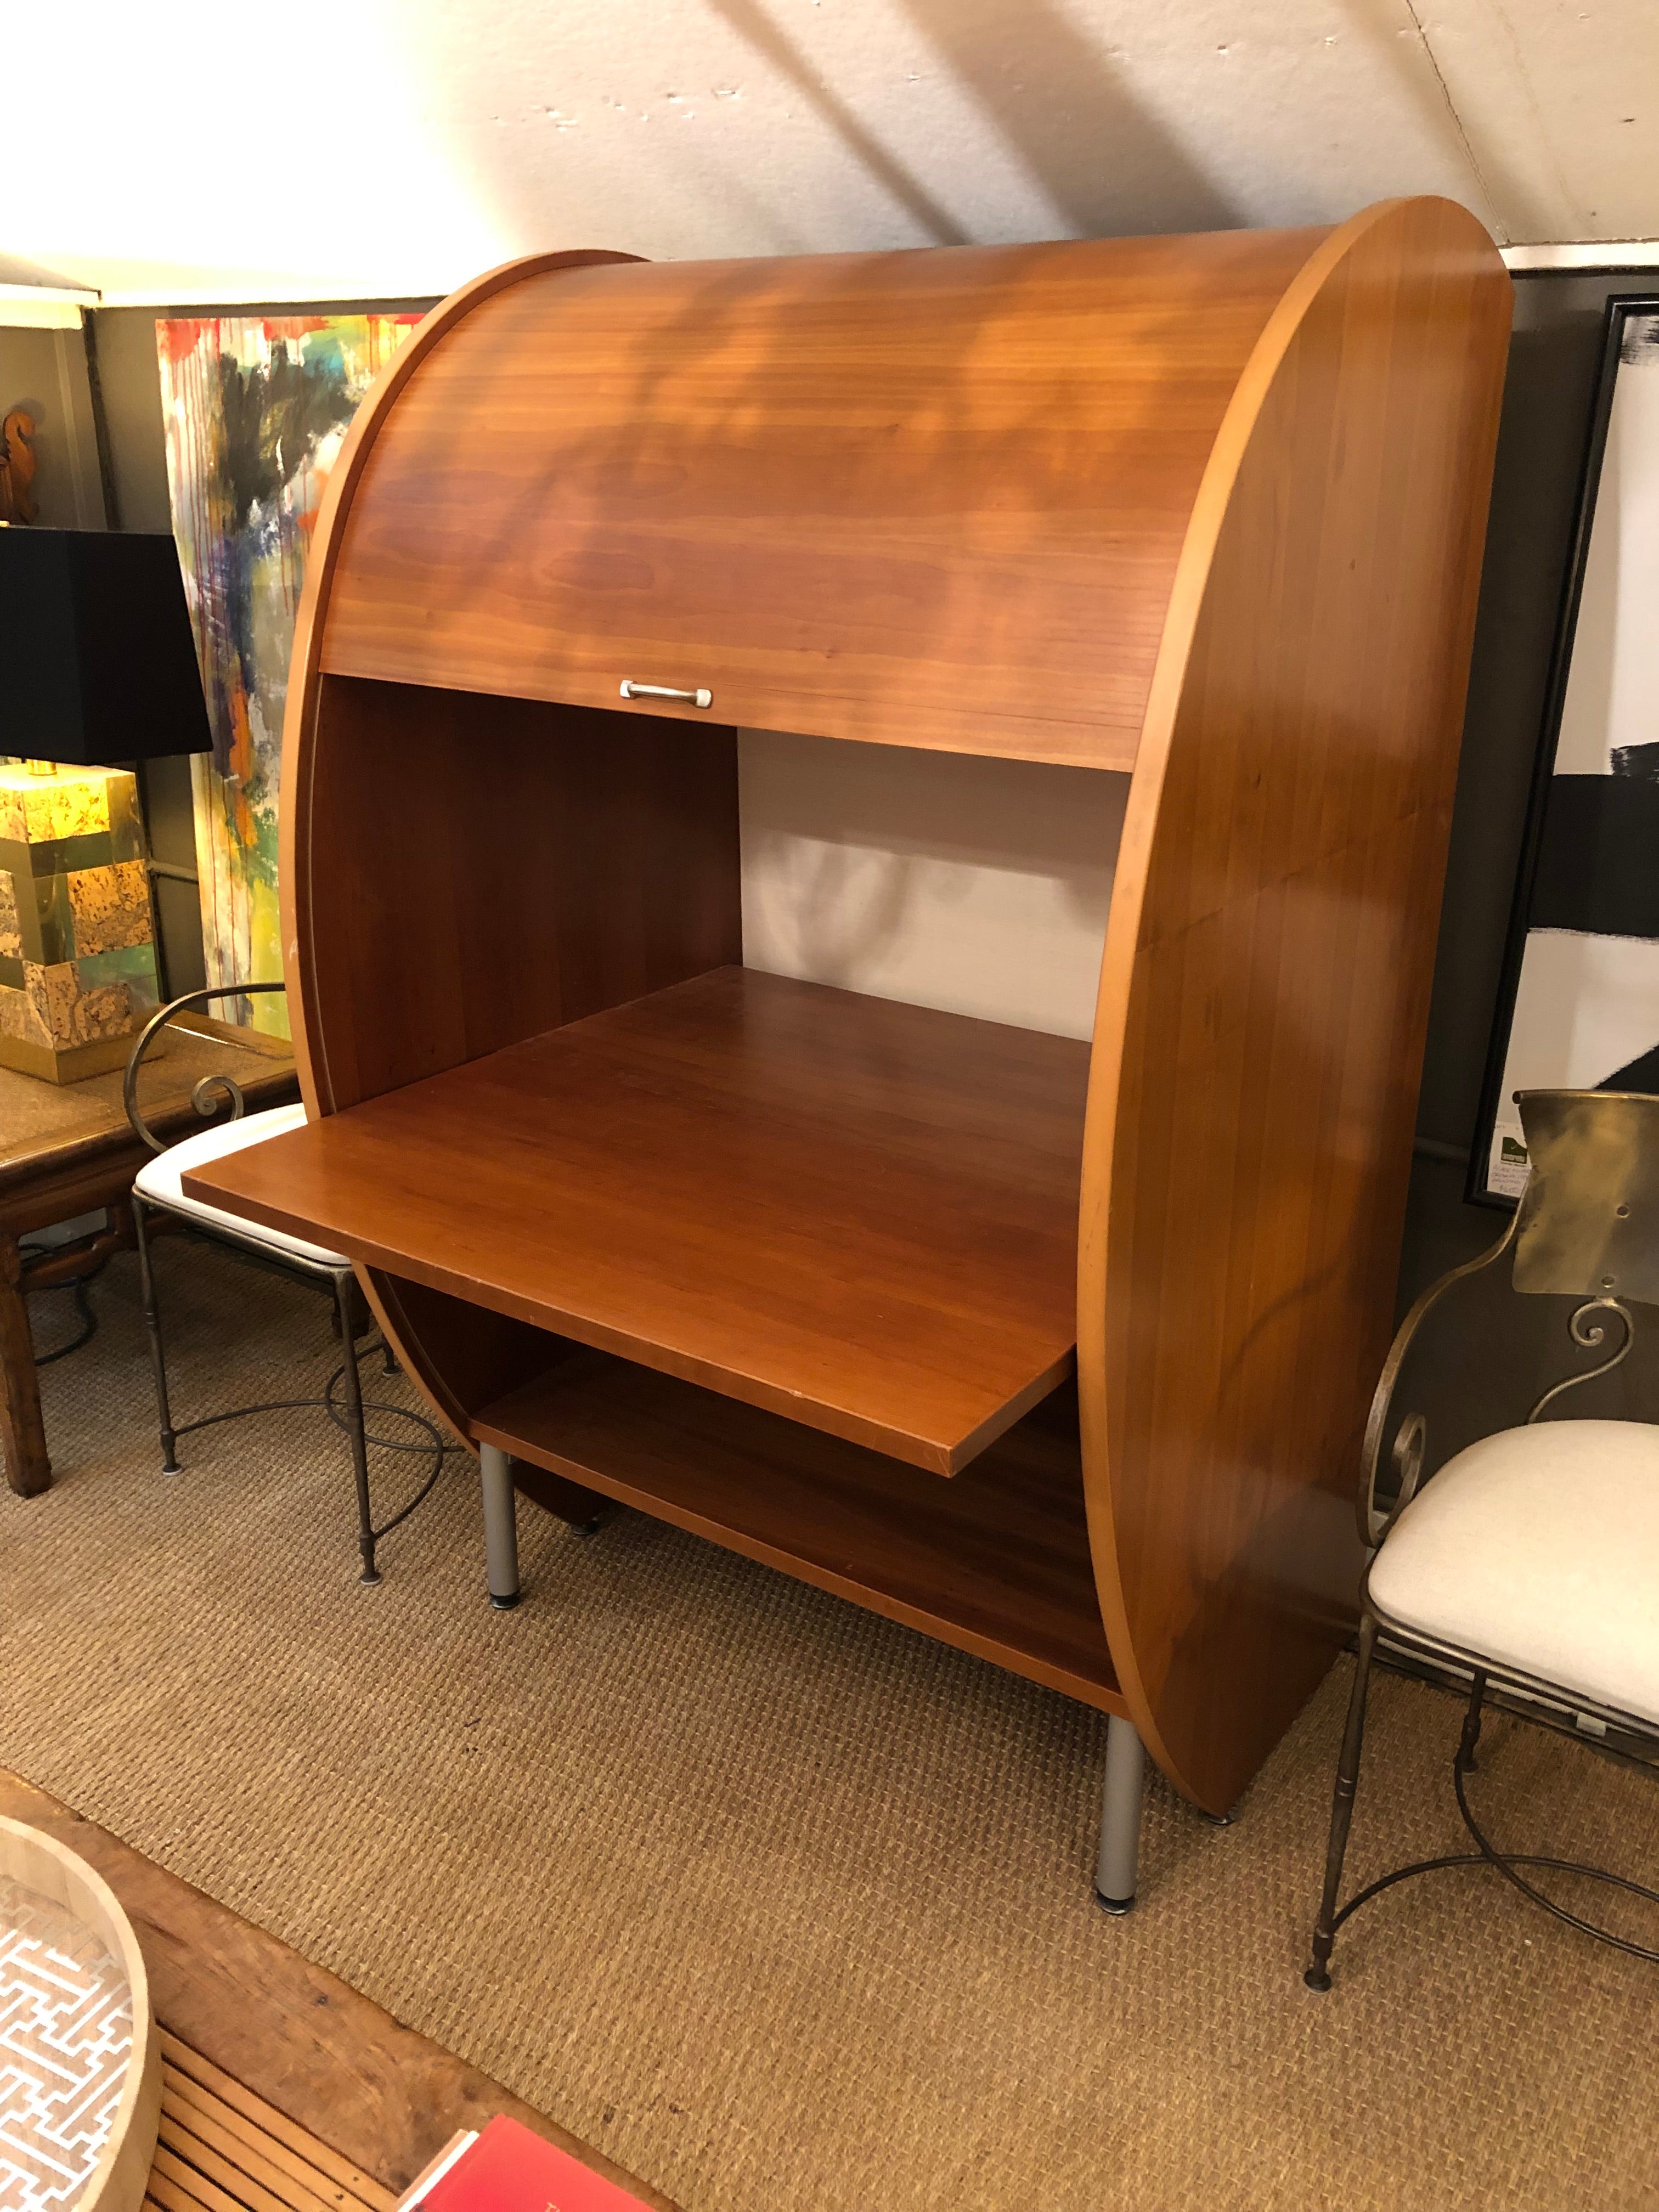 A rare sculptural Mid-Century Modern cherry tambour front sensually rounded dry bar or desk having a front that slides up and down to reveal a pull out table top. Incredible design and clever engineering. There is also a bottom shelf. Makes an